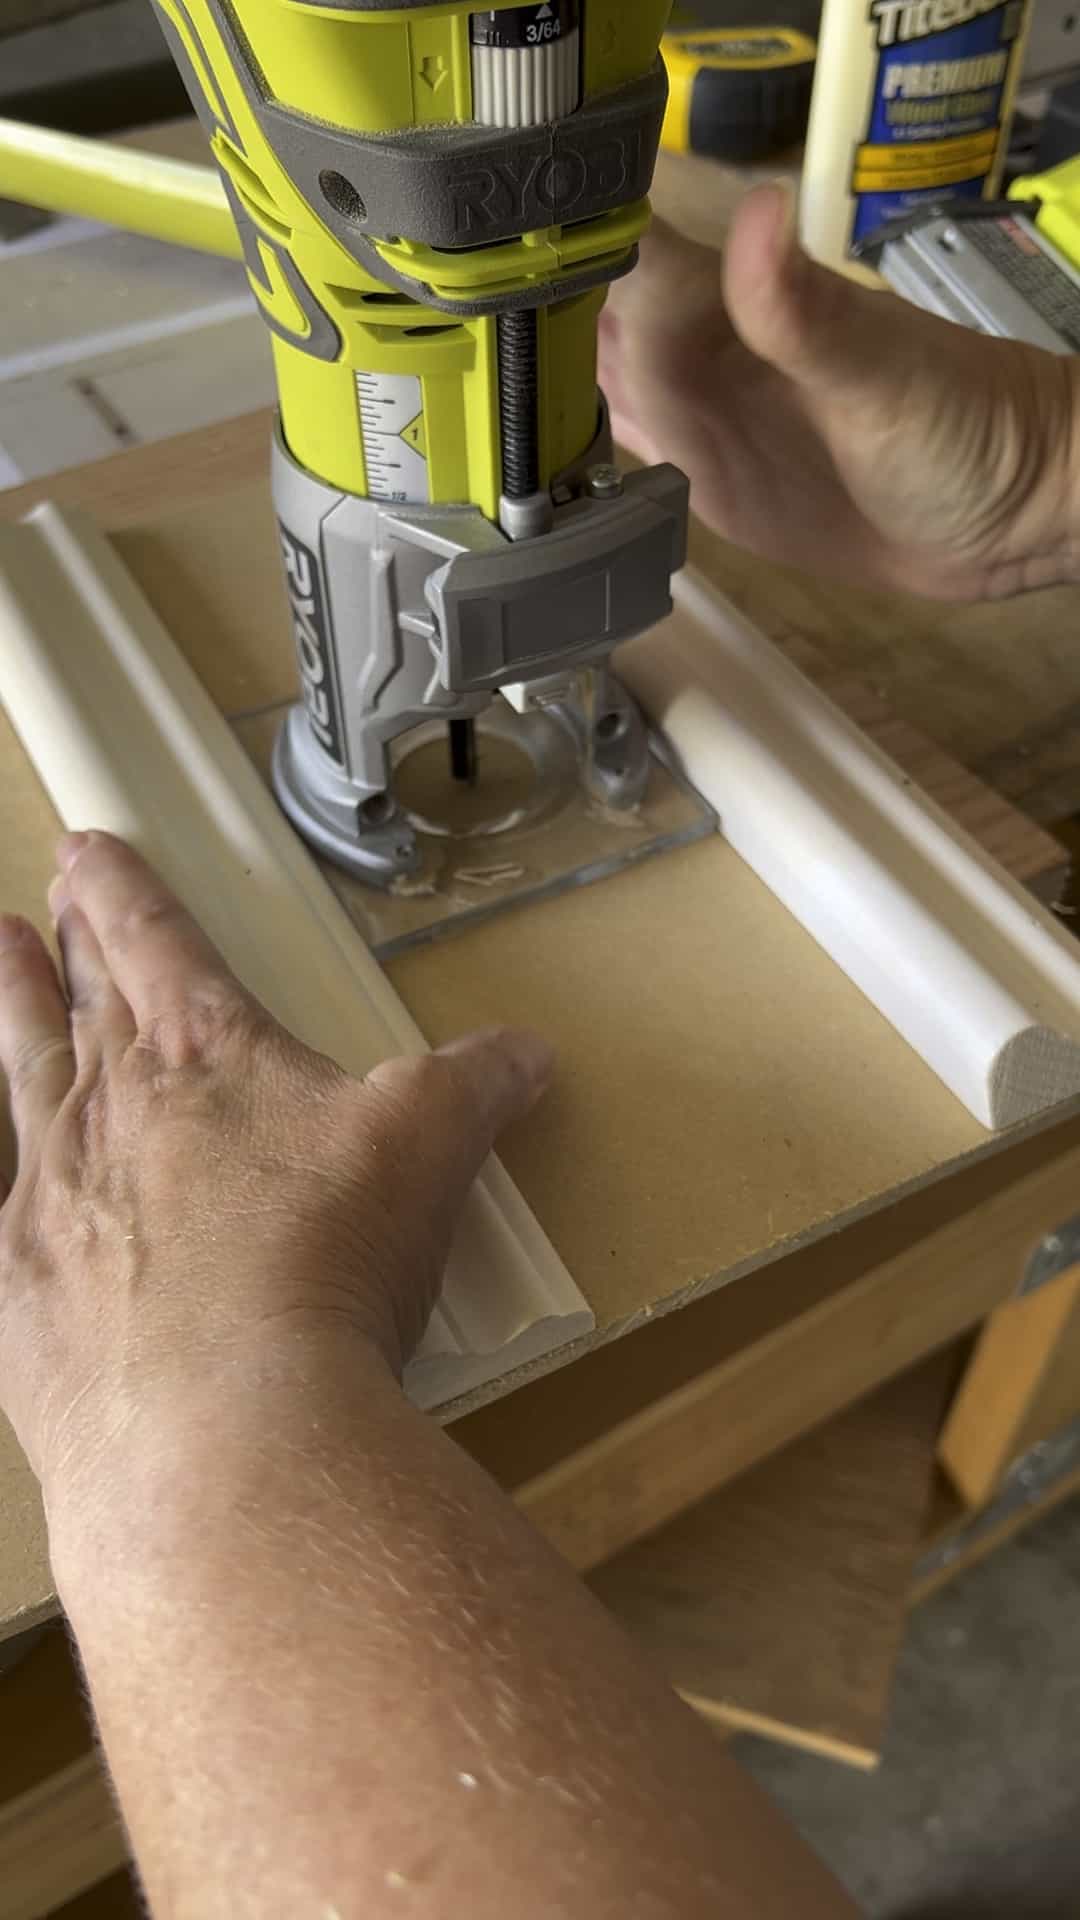 build a router jig for cutting in the center of a board